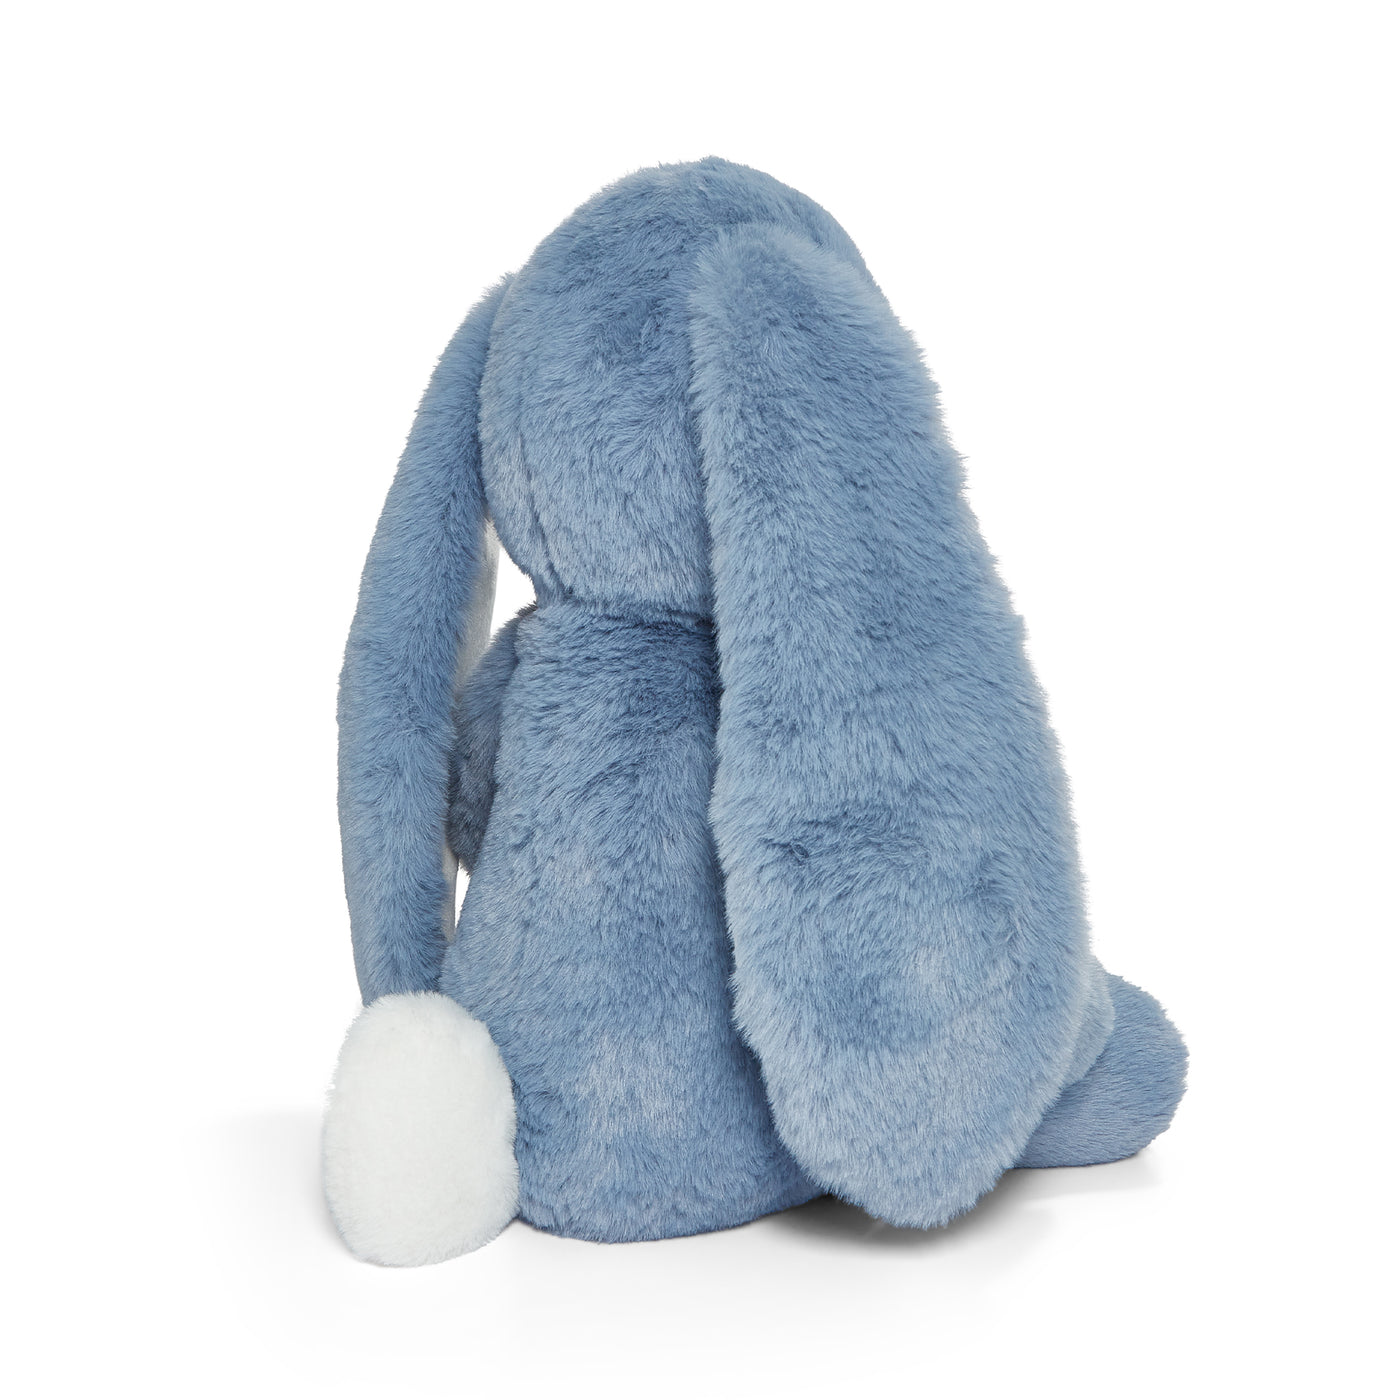 Personalized Big Floppy Bunny - Blue - Give Wink